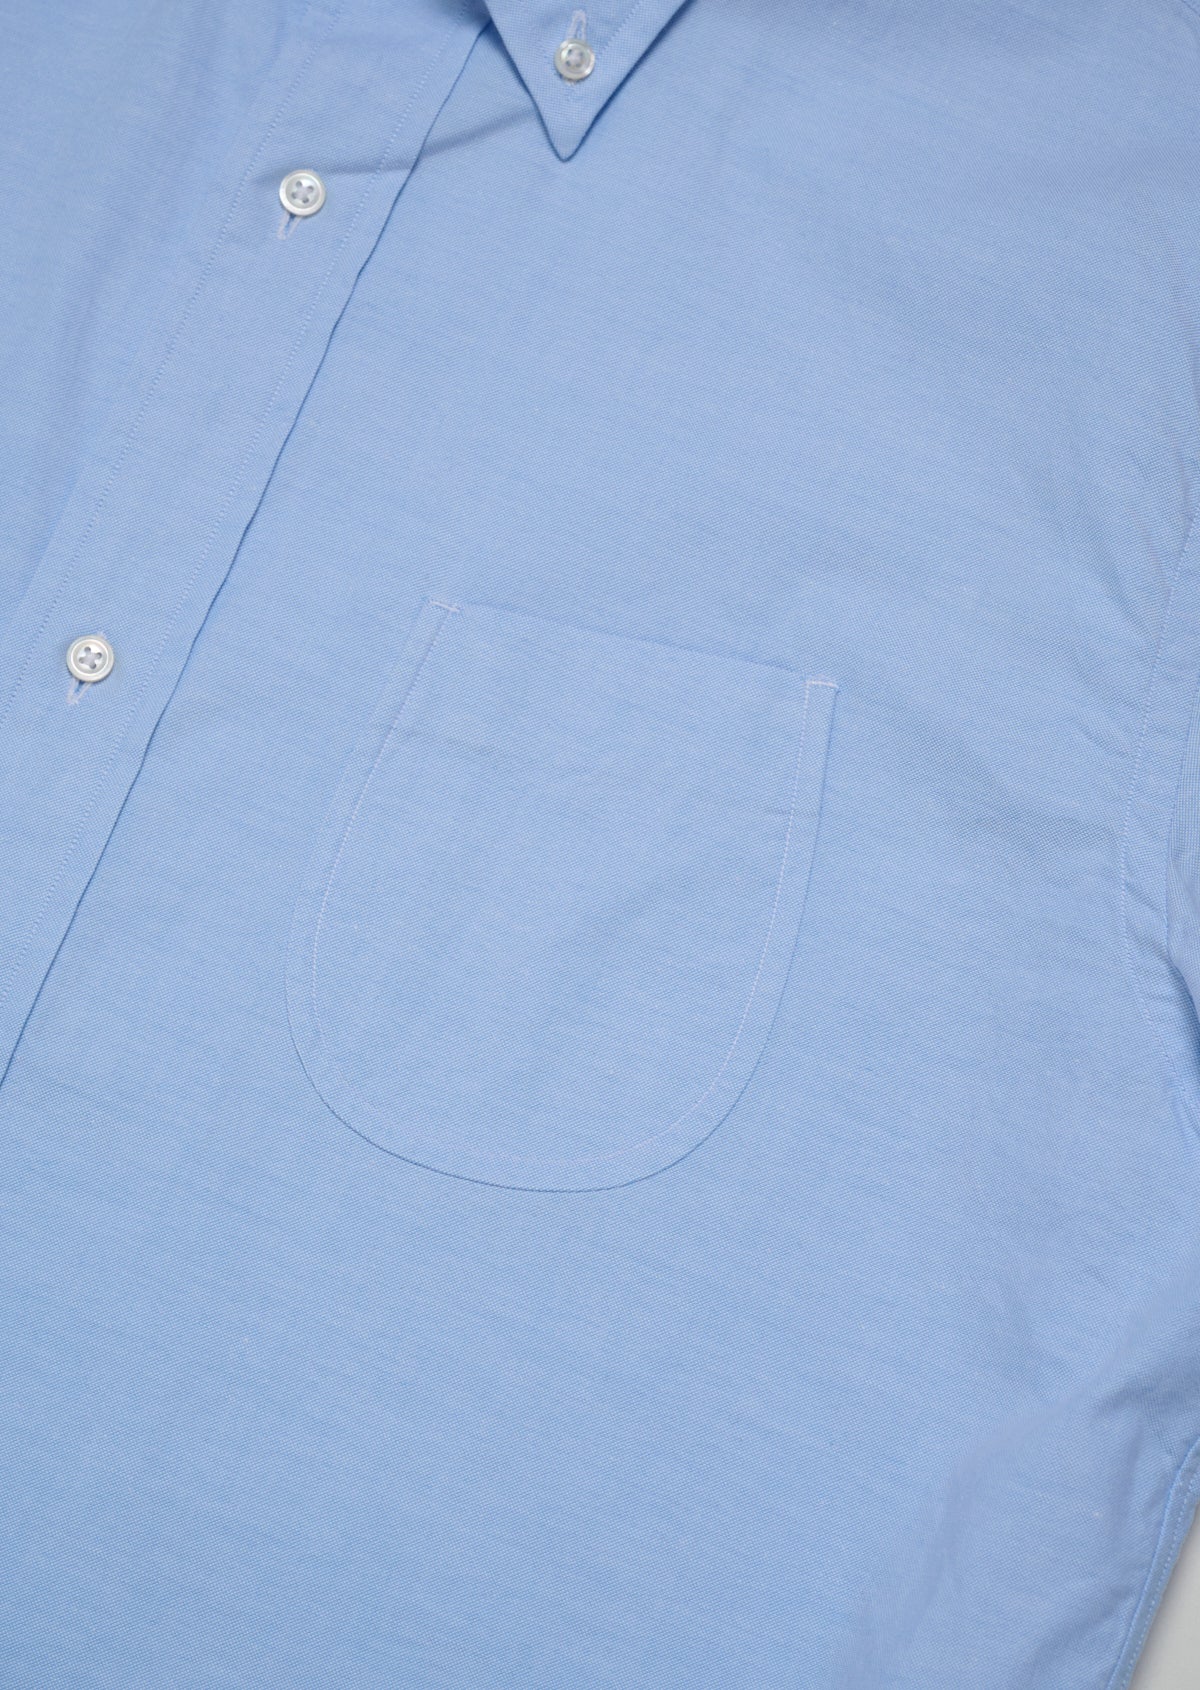 OX FORD BUTTON DOWN SHORT SLEEVE SHIRTS BLUE 8031-1603